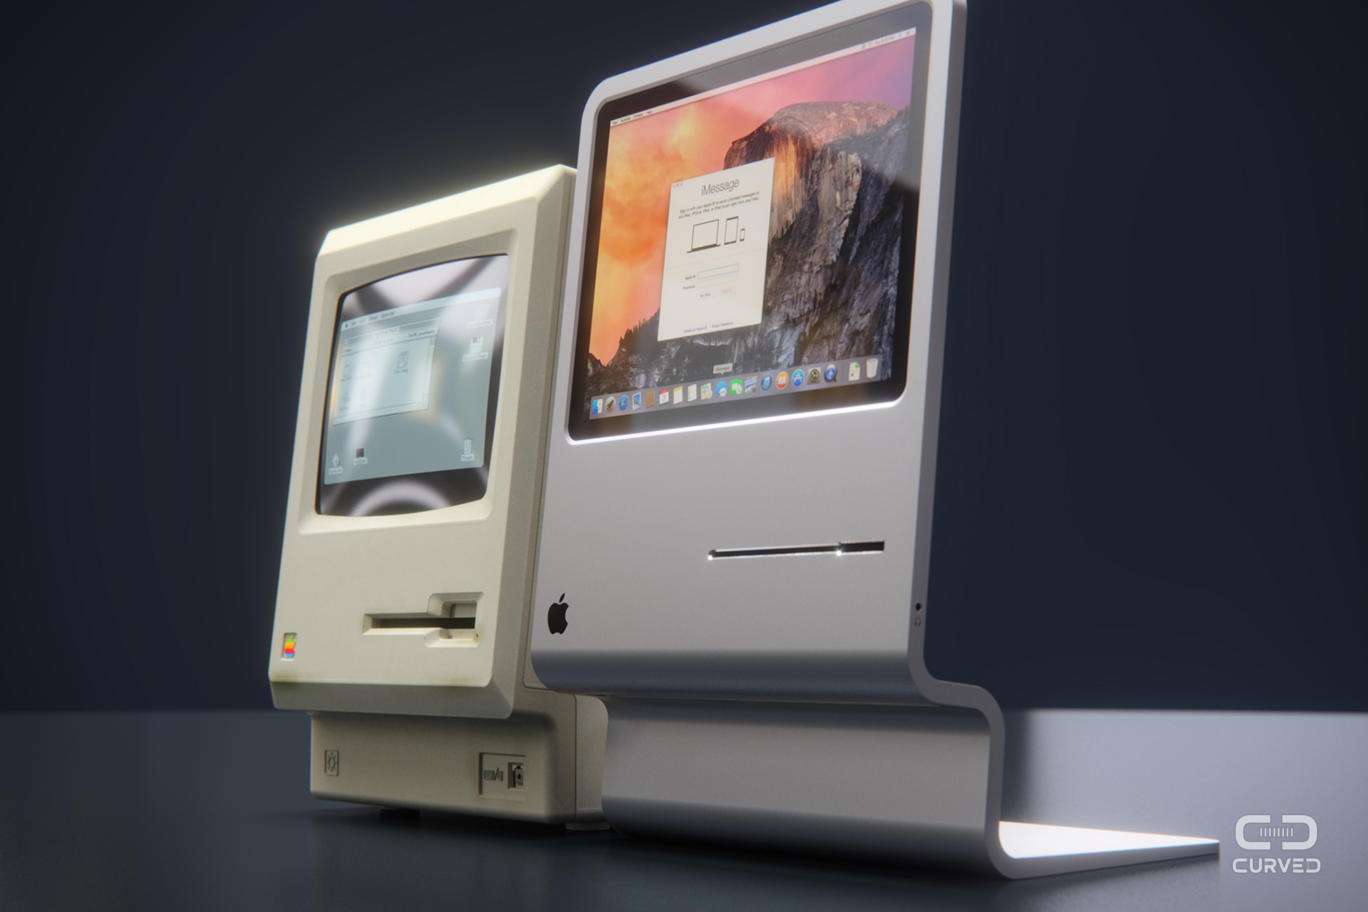 Curved Labs Mac side-by-side with Original Macintosh